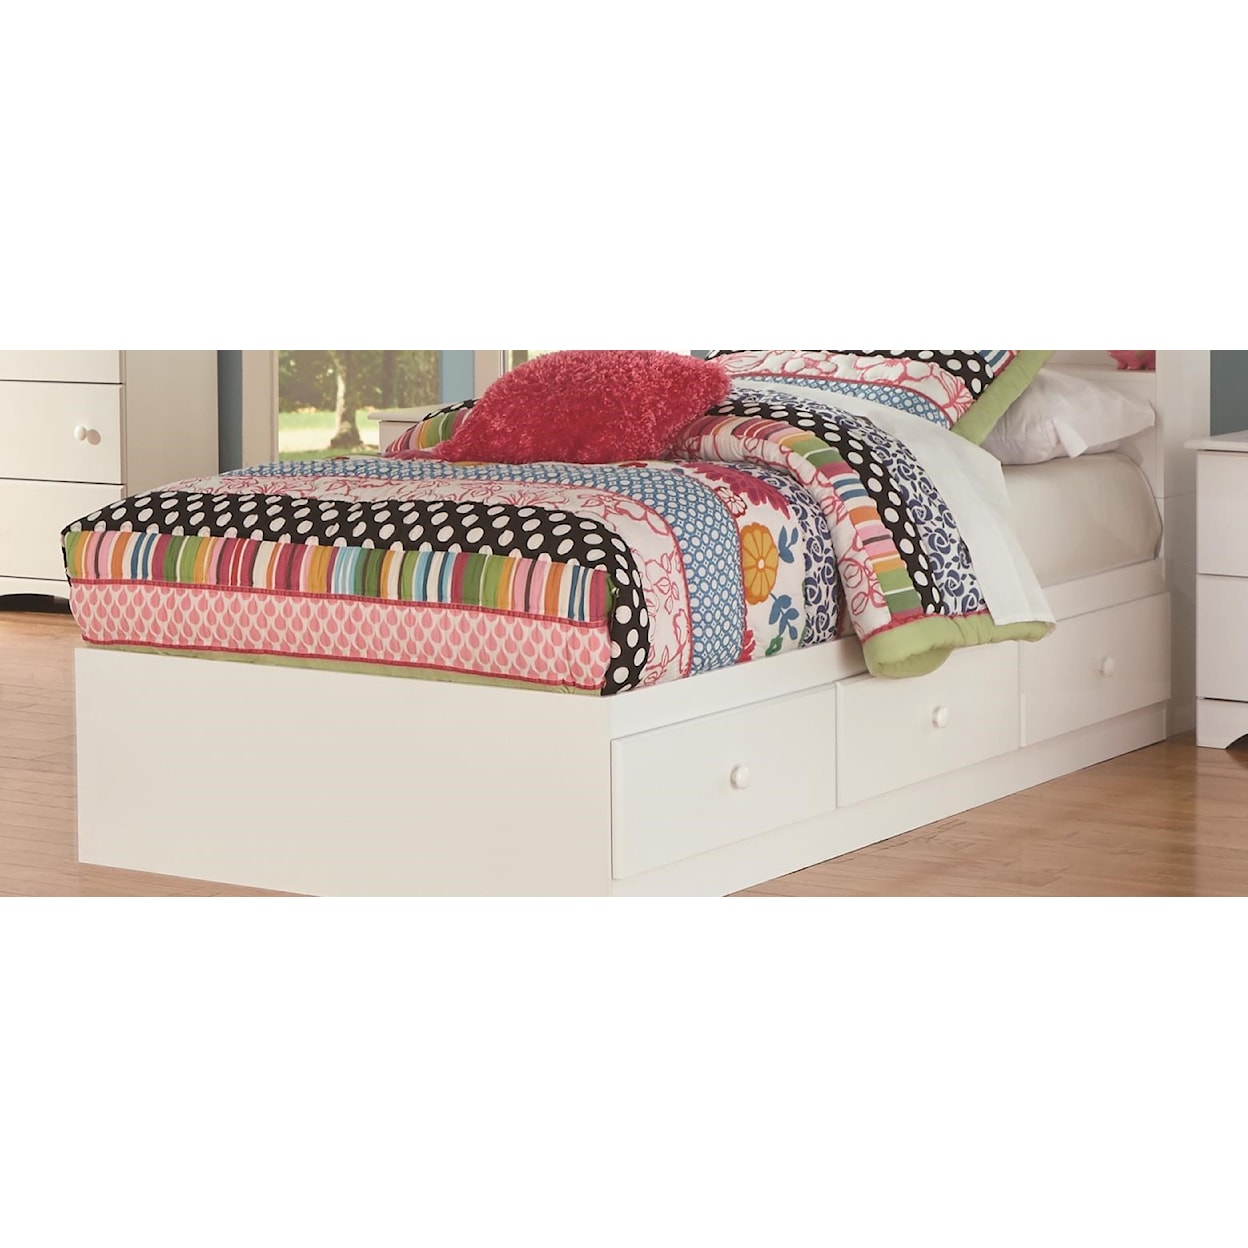 Perdue 14000 Series Full Panel Bed with Storage Package